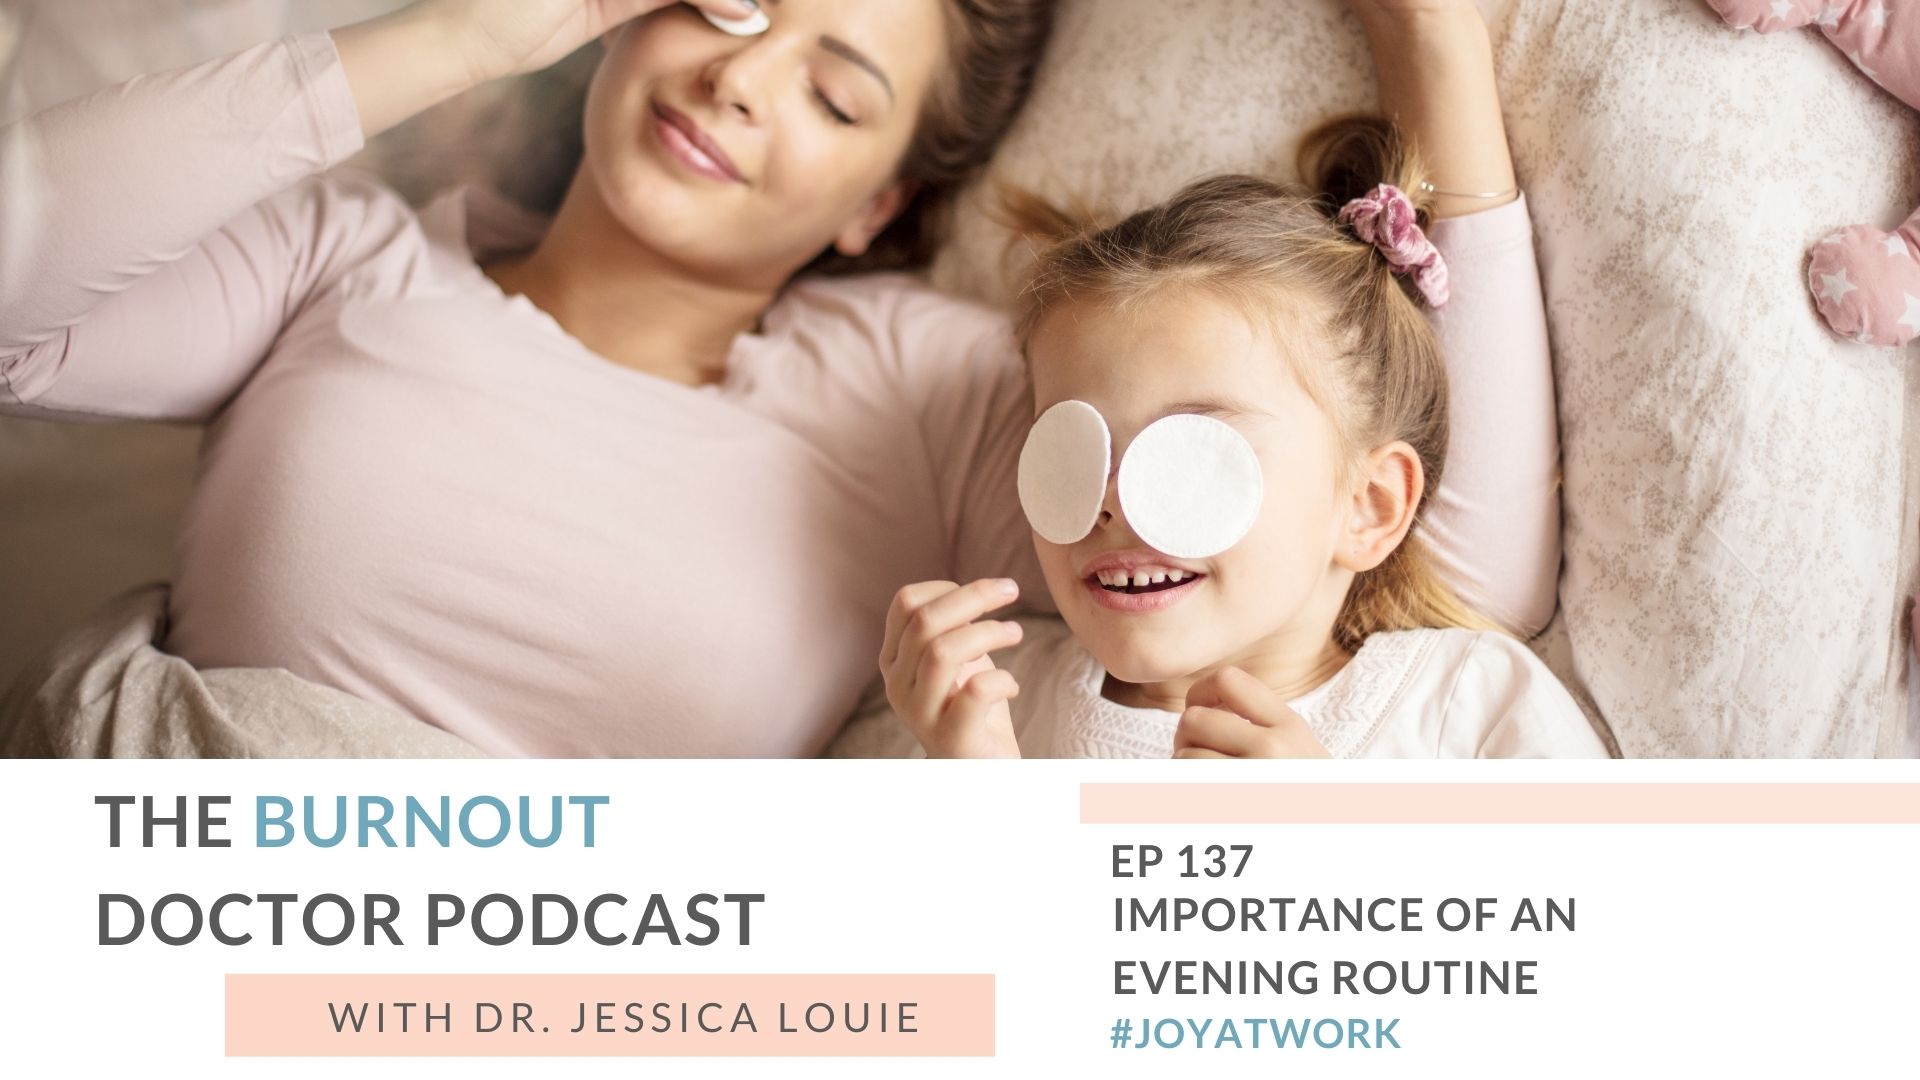 Importance of an evening routine. Why an evening routine is more important than a morning routine. Nighttime routine and habits. The Burnout Doctor Podcast with Dr. Jessica Louie. Keynote speaker on burnout, well-being, simplifying, konmari method.